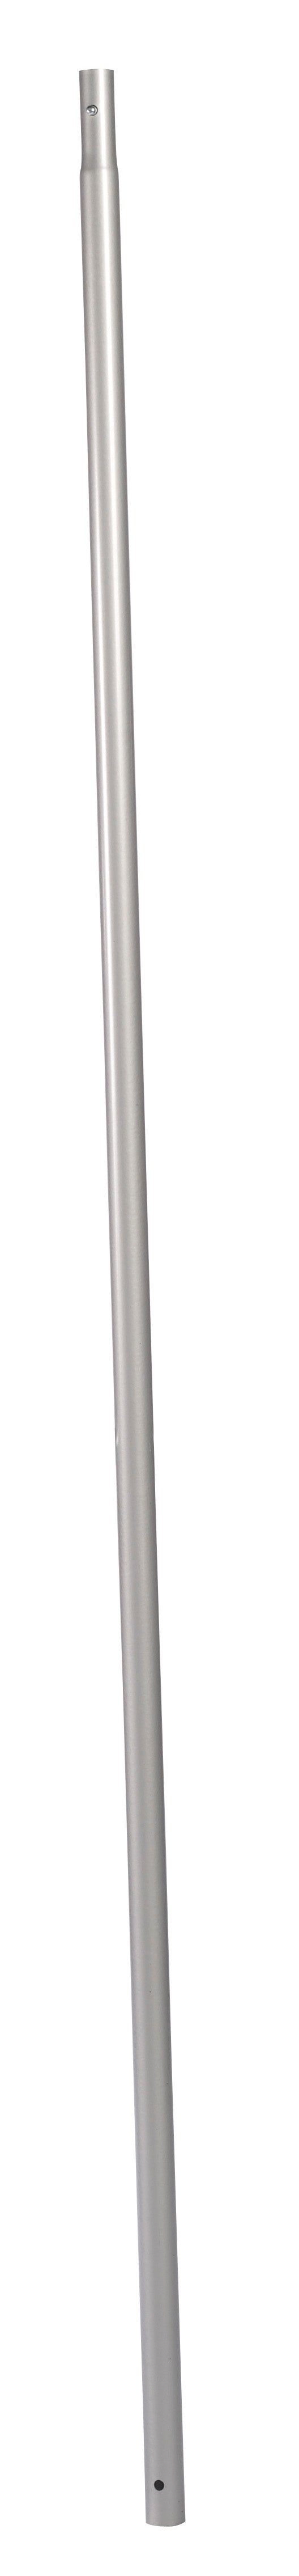 60-Inch section tube, GPRR24